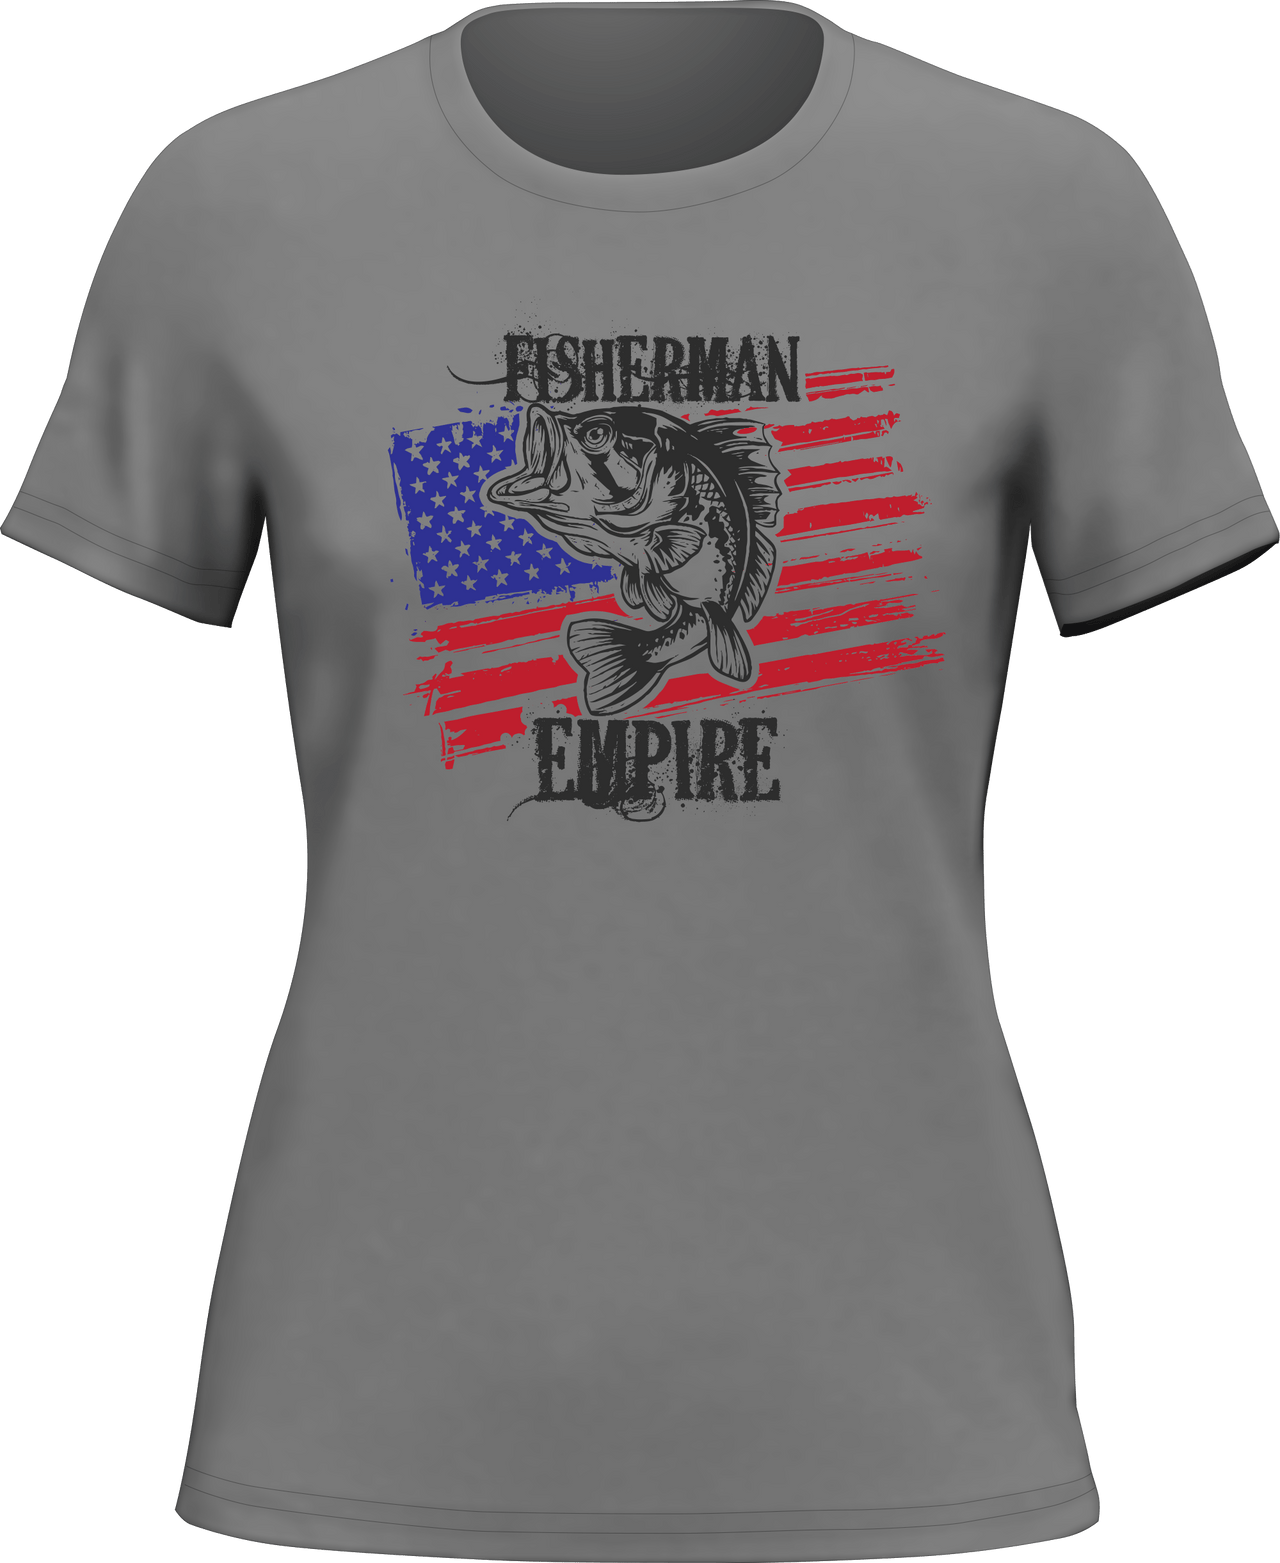 Fisherman American Empire Color T-Shirt for Women